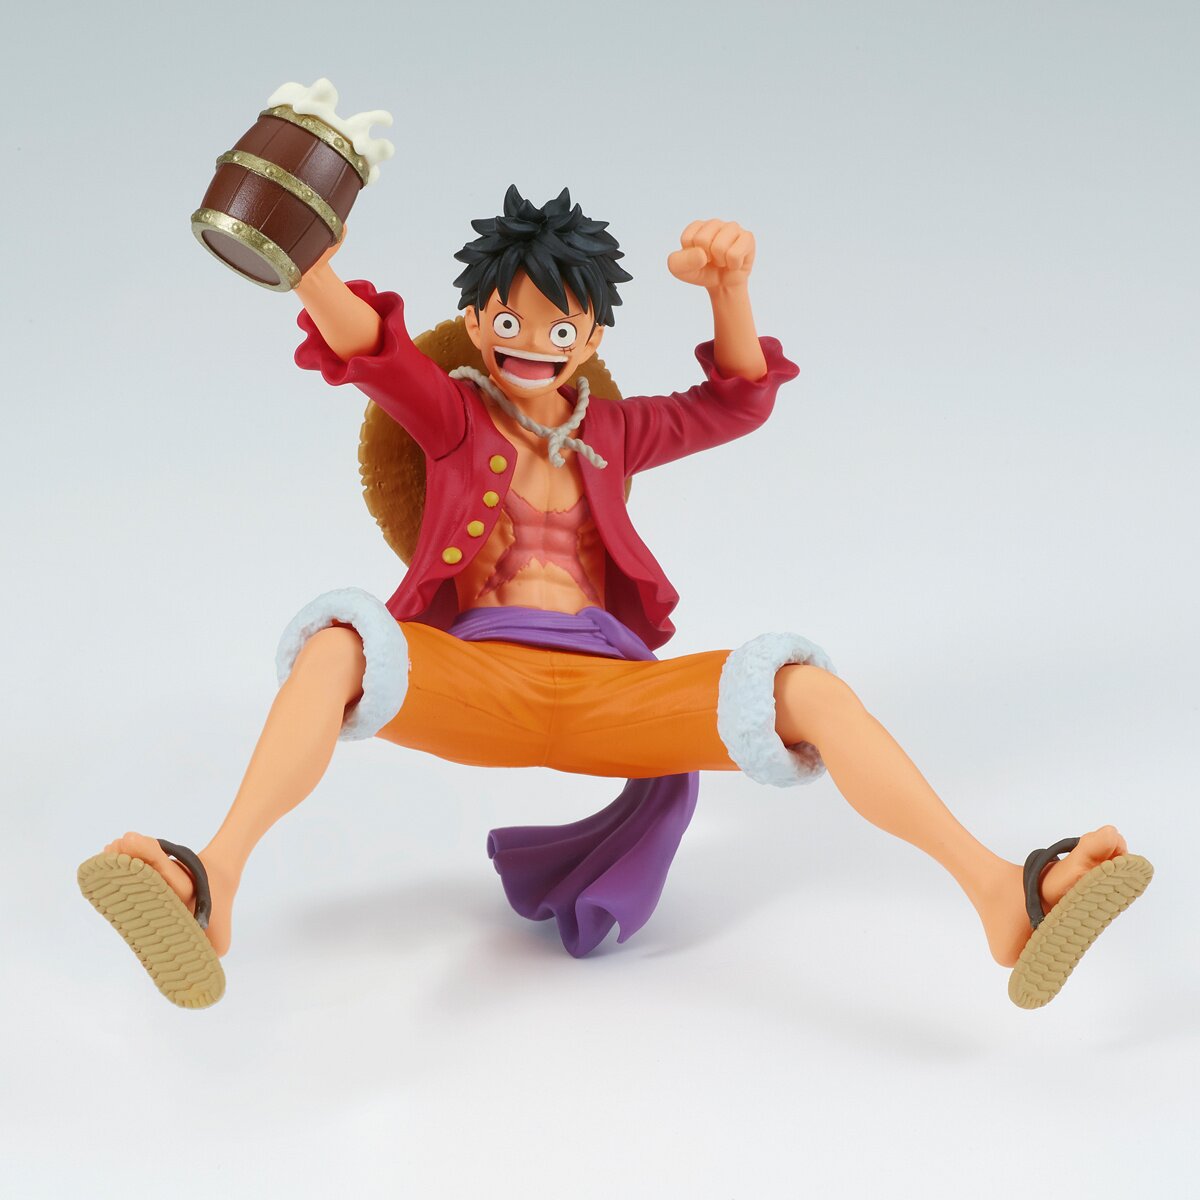  ANIME HEROES - One Piece - Monkey D. Luffy Renewal Version  Action Figure : Everything Else